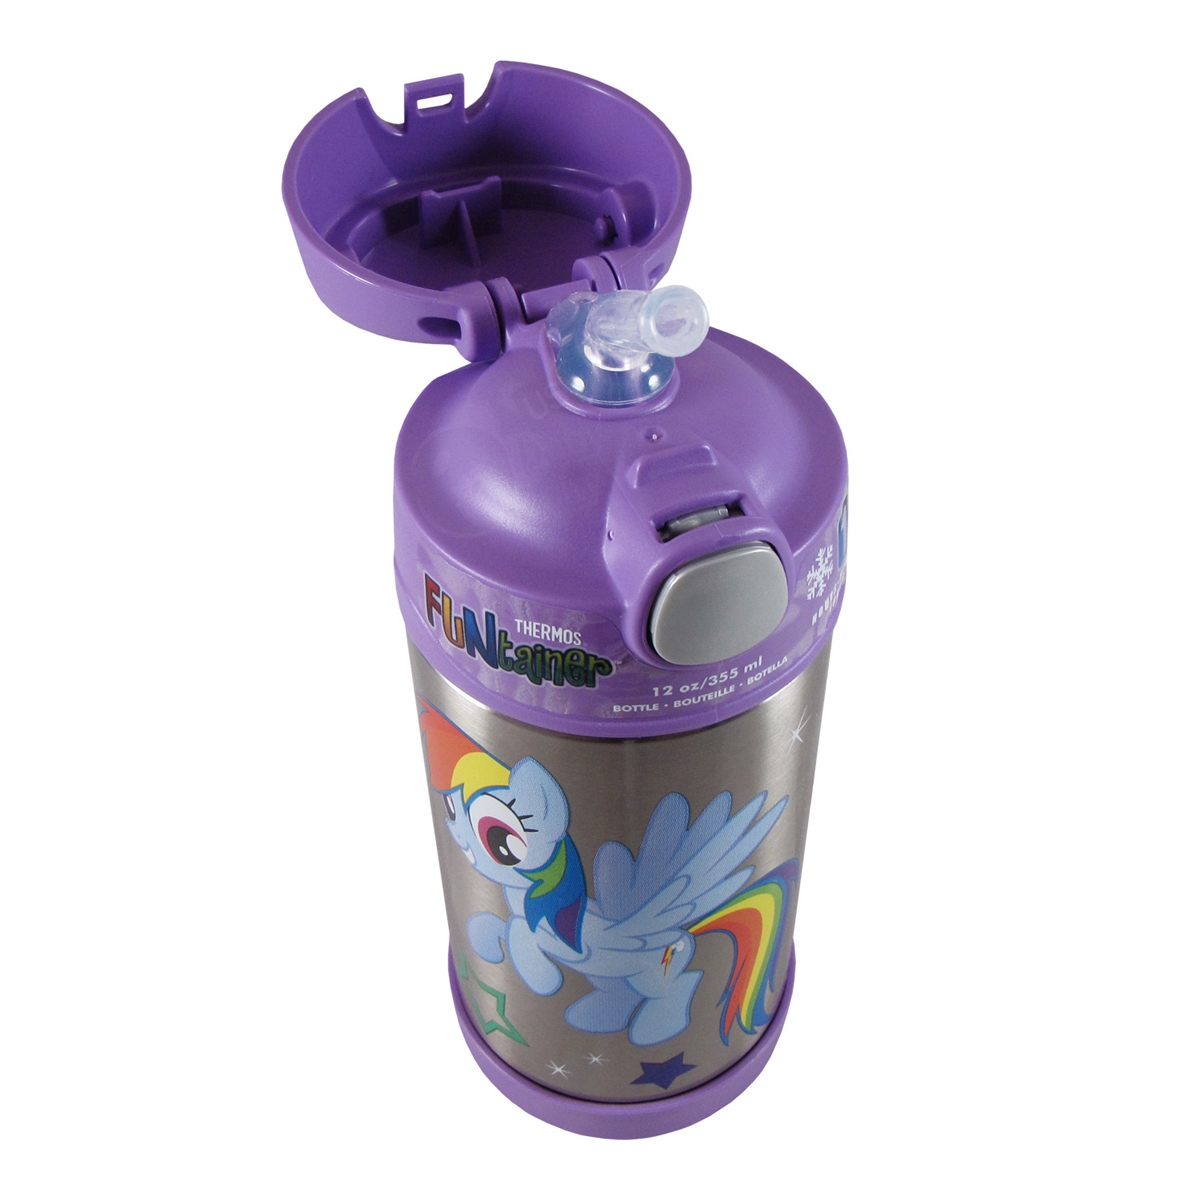 FUNtainer Bottle Disney Planes Dusty - 12 oz. (Thermos)